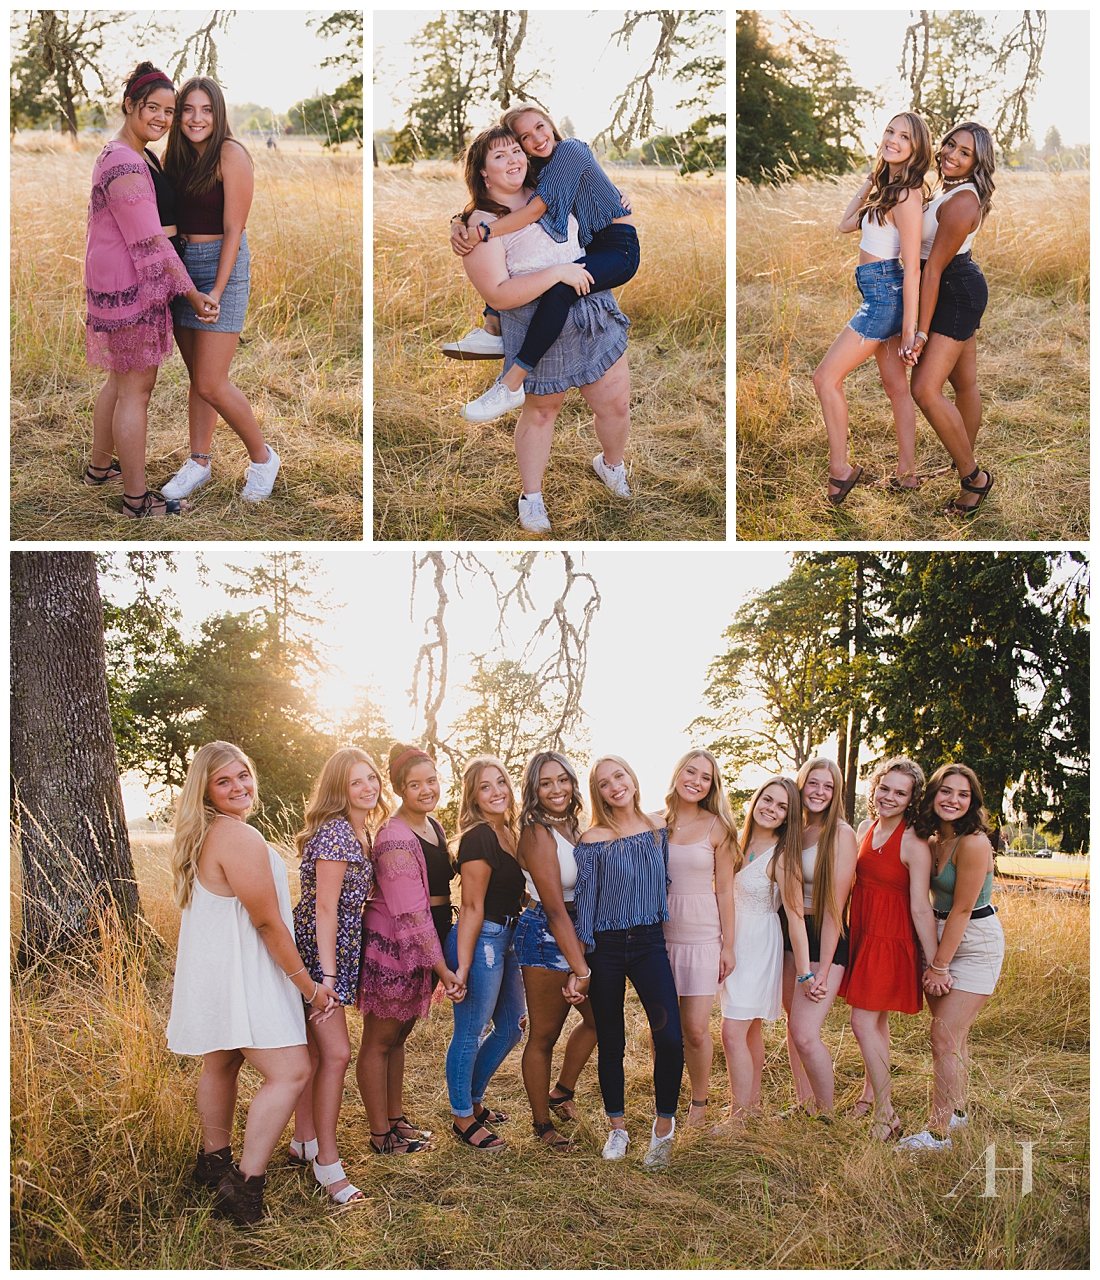 Fun Poses and Portraits for Best Friends | High School Senior Photographer Amanda Howse